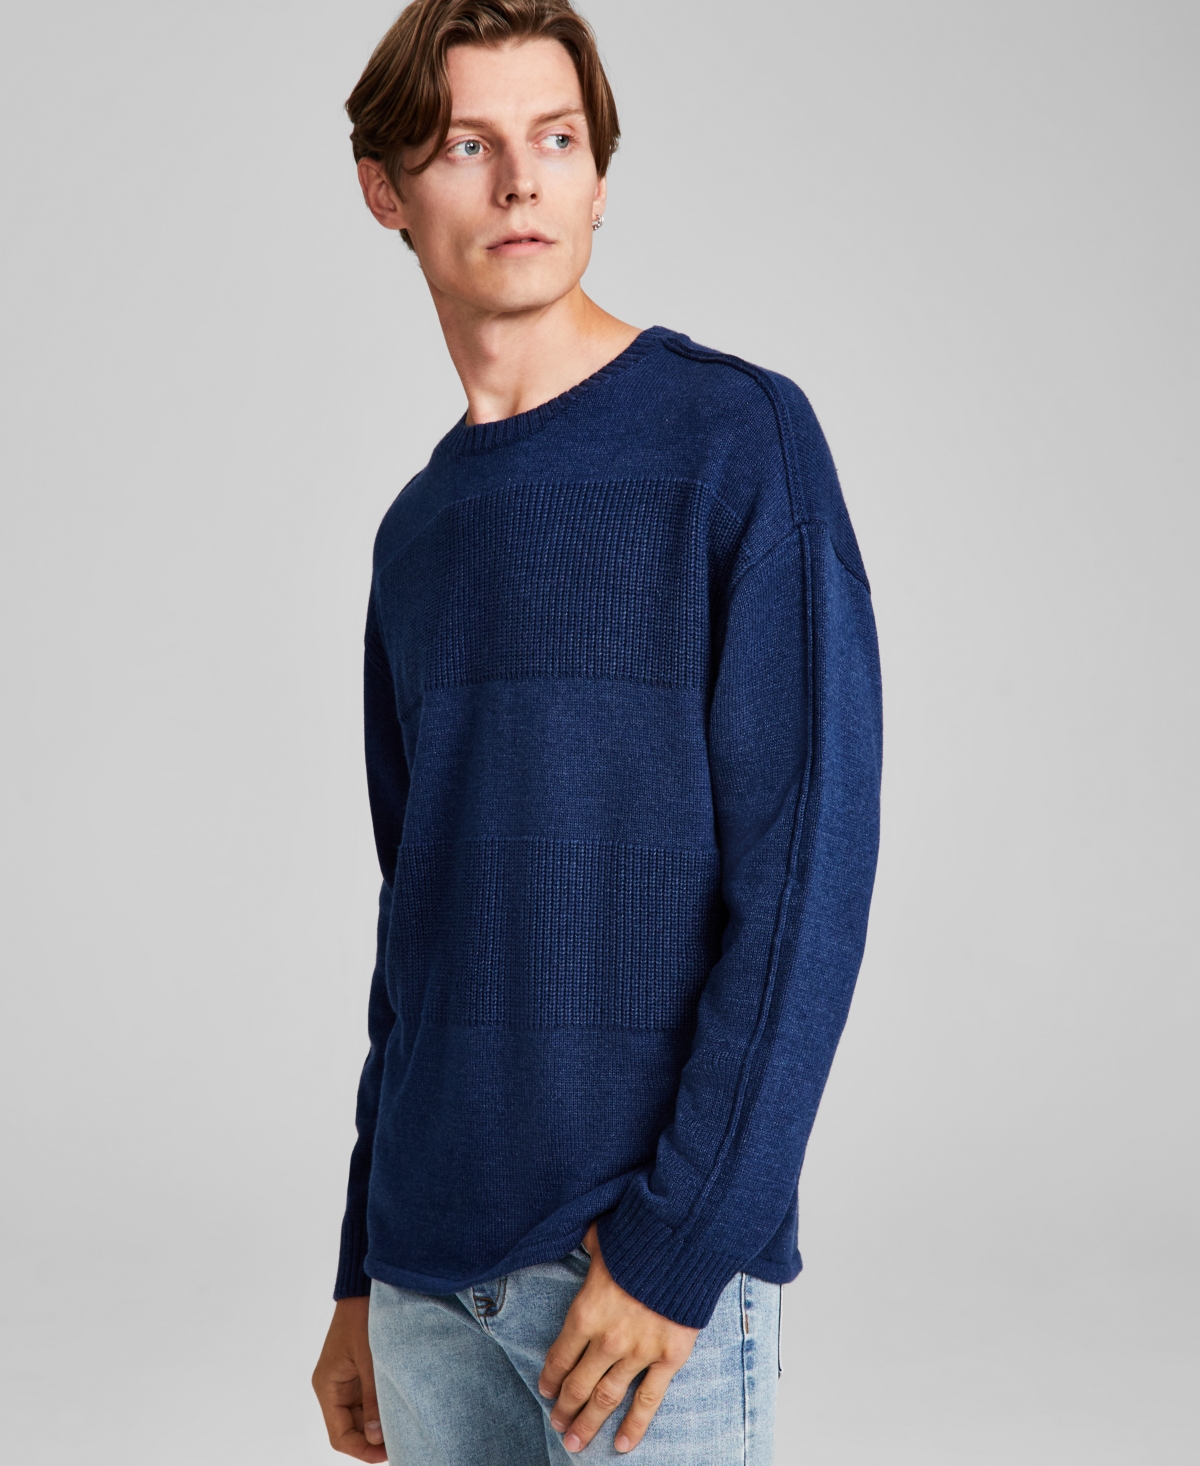 Men's Textured Stripe Sweater, Created for Macy's - Midnight Heather